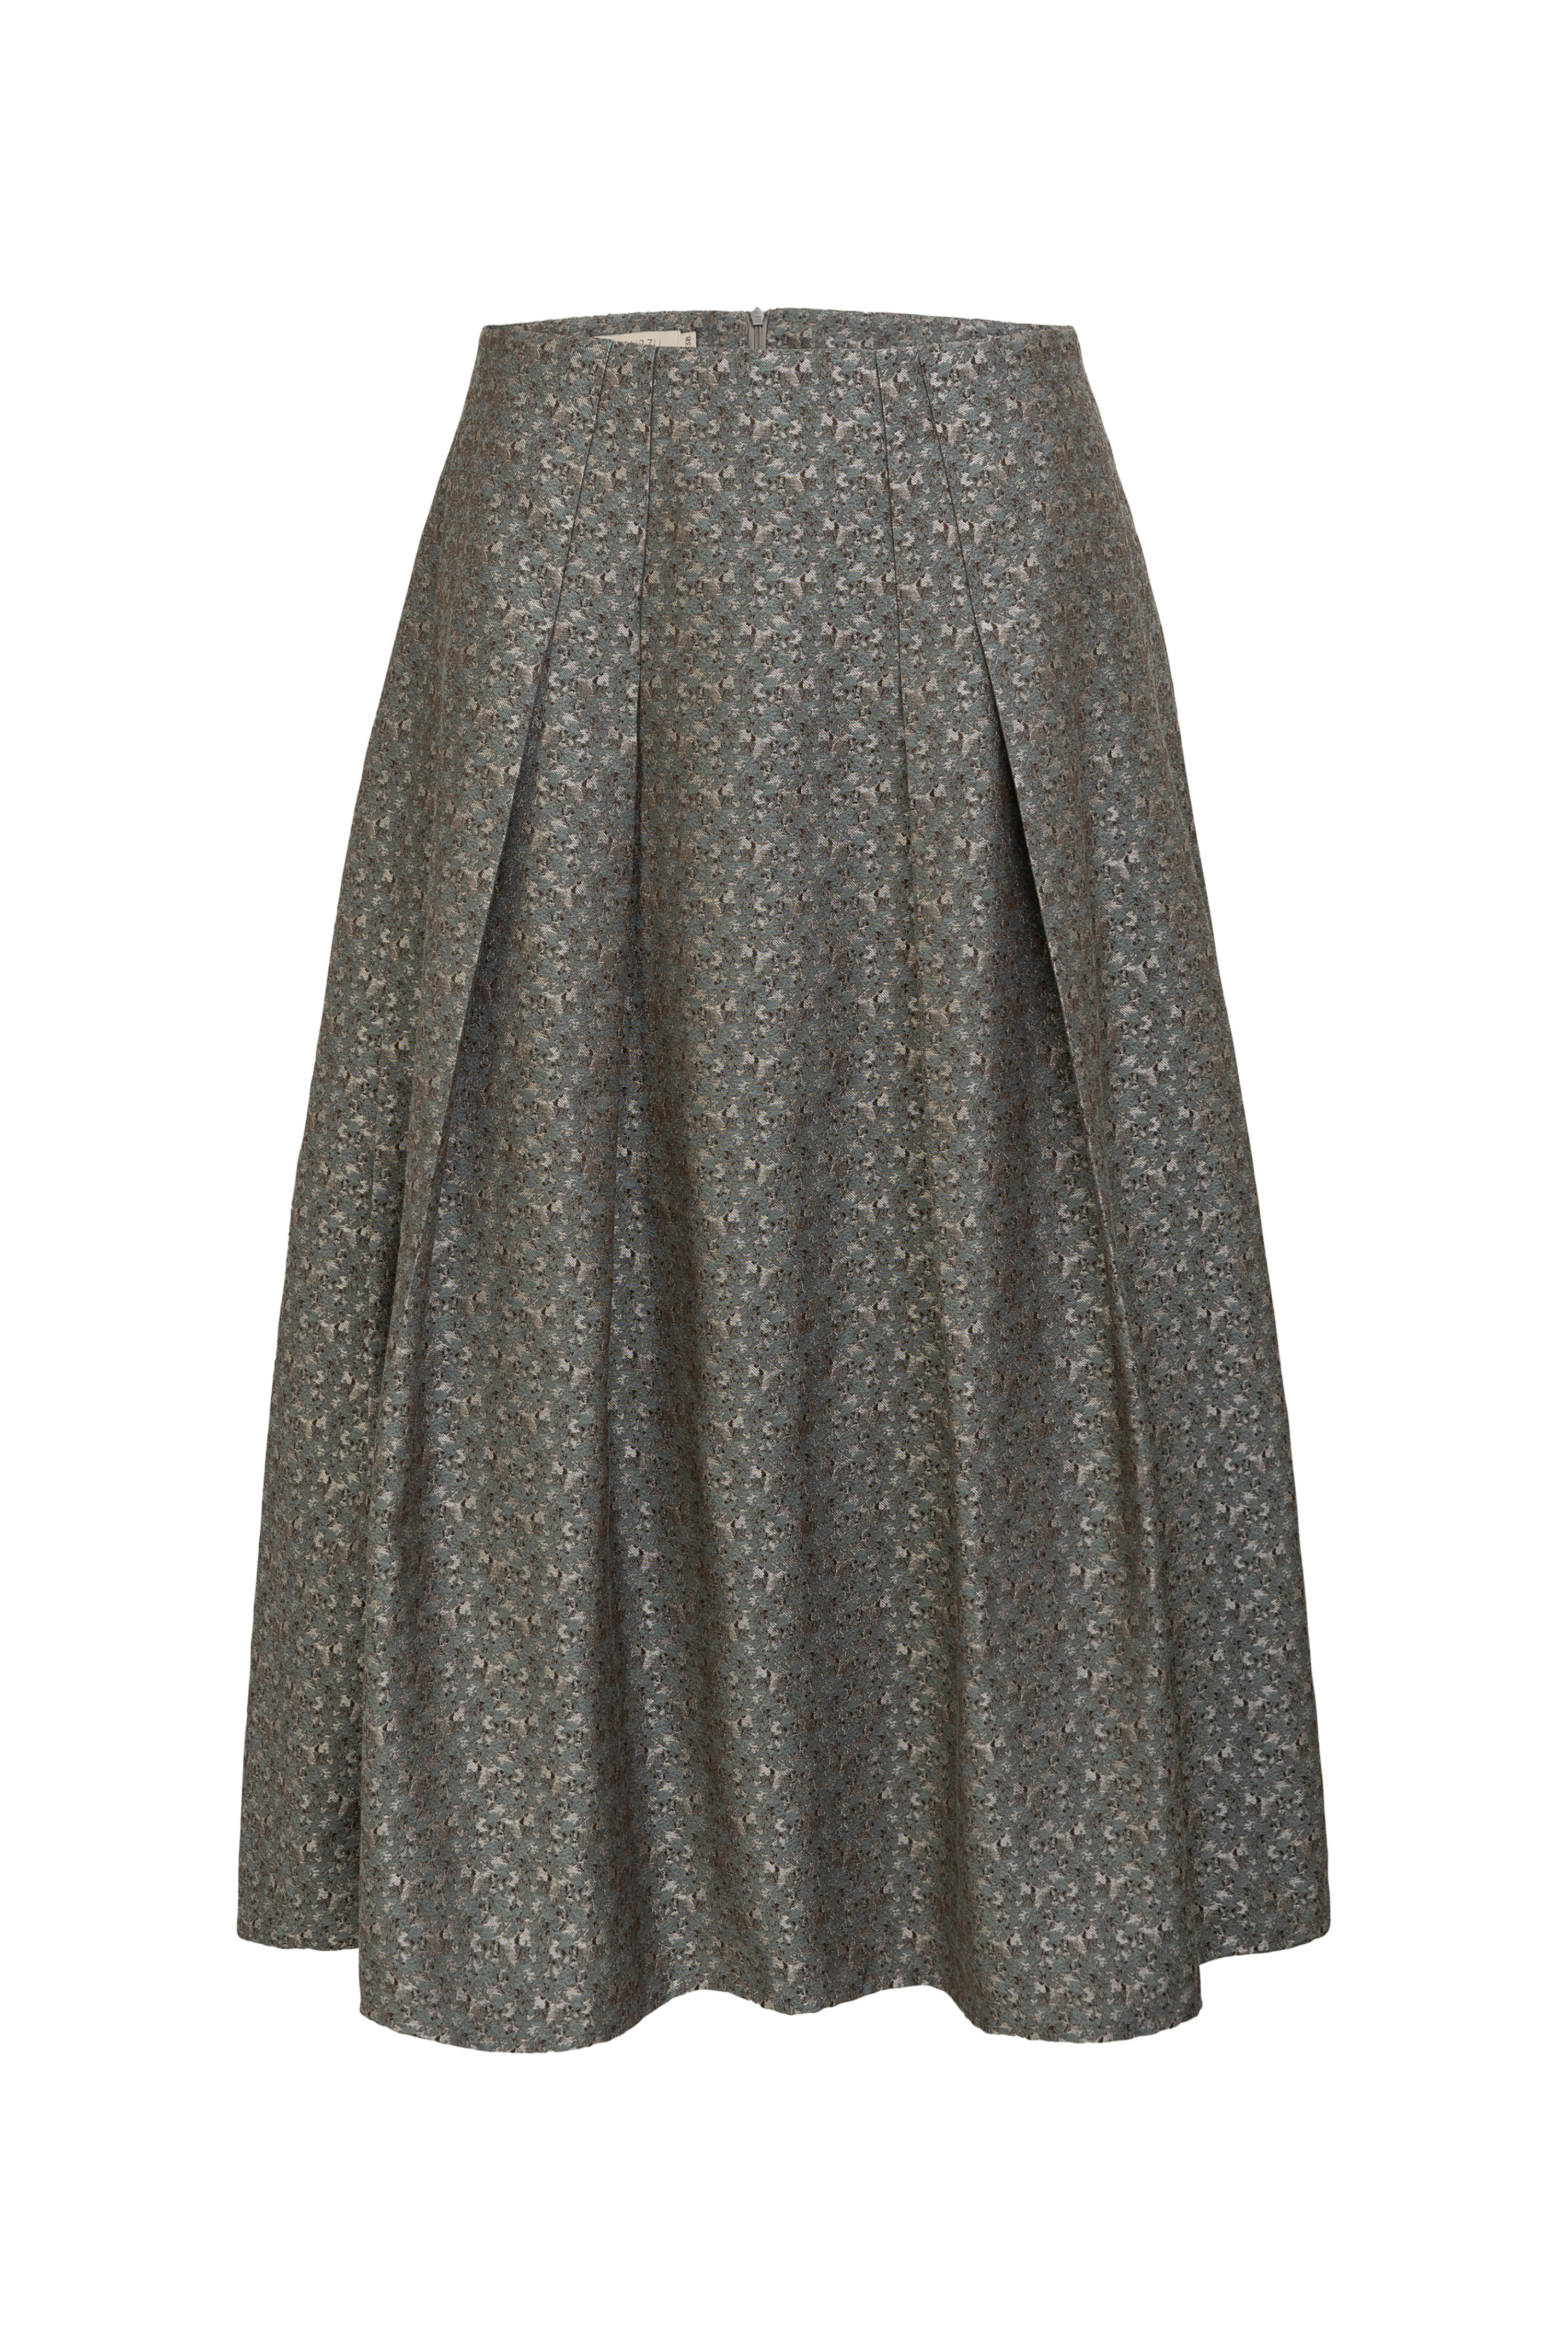 Brocade skirt with stitched pleats